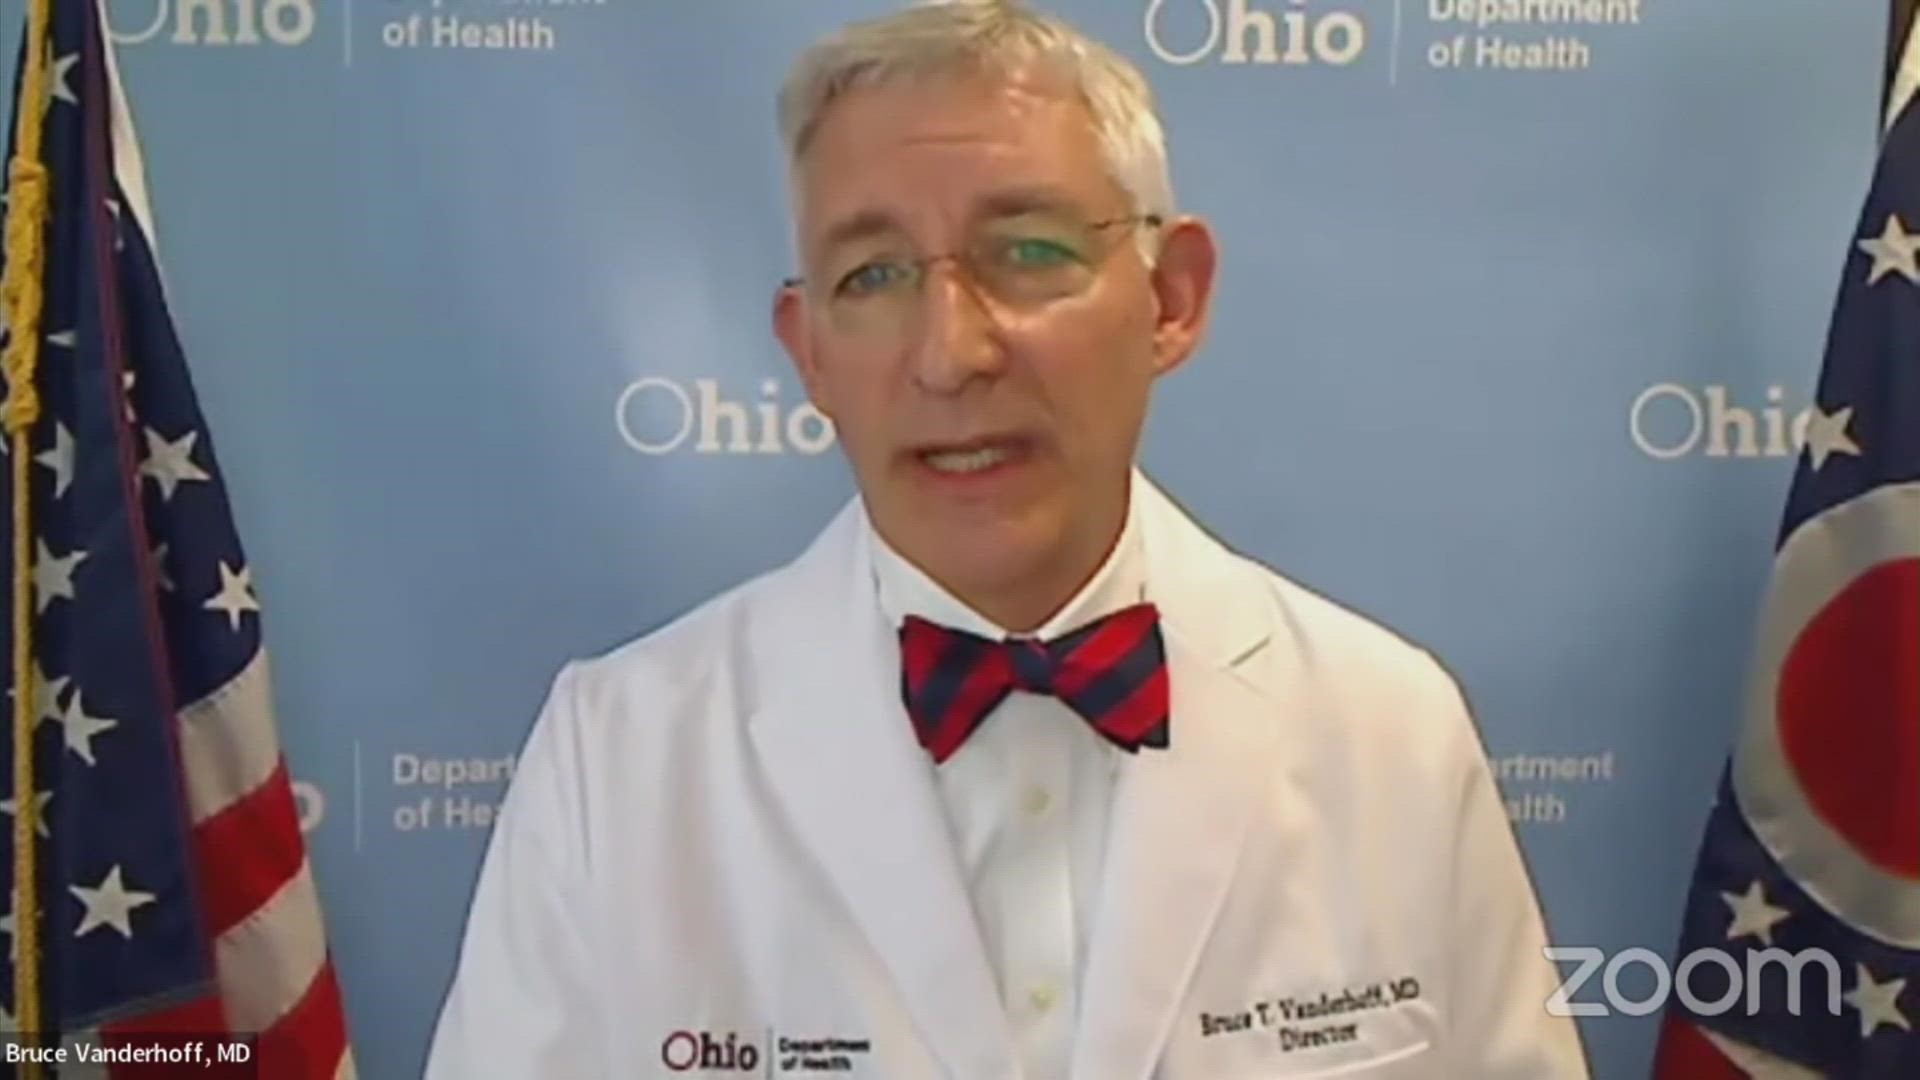 In an update Wednesday, Dr. Bruce Vanderhoff said it's important to add context to reports of rising COVID data.